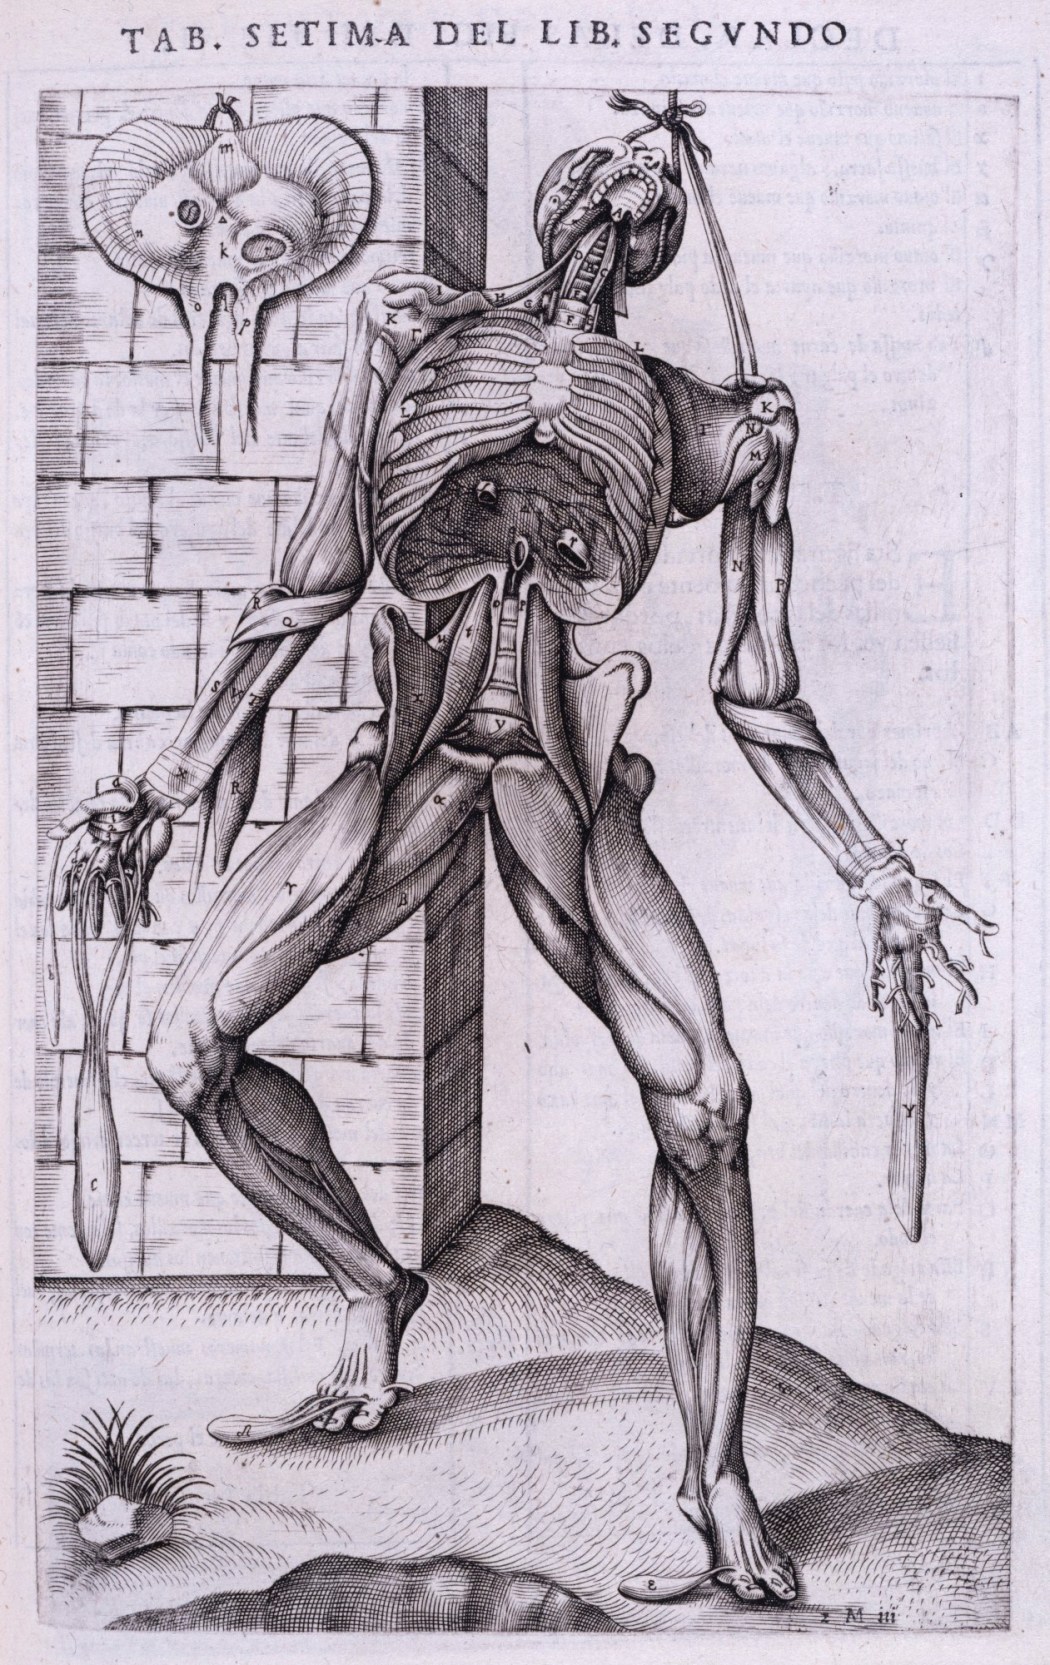 The Illustrated Human: The Impact of Andreas Vesalius – Source